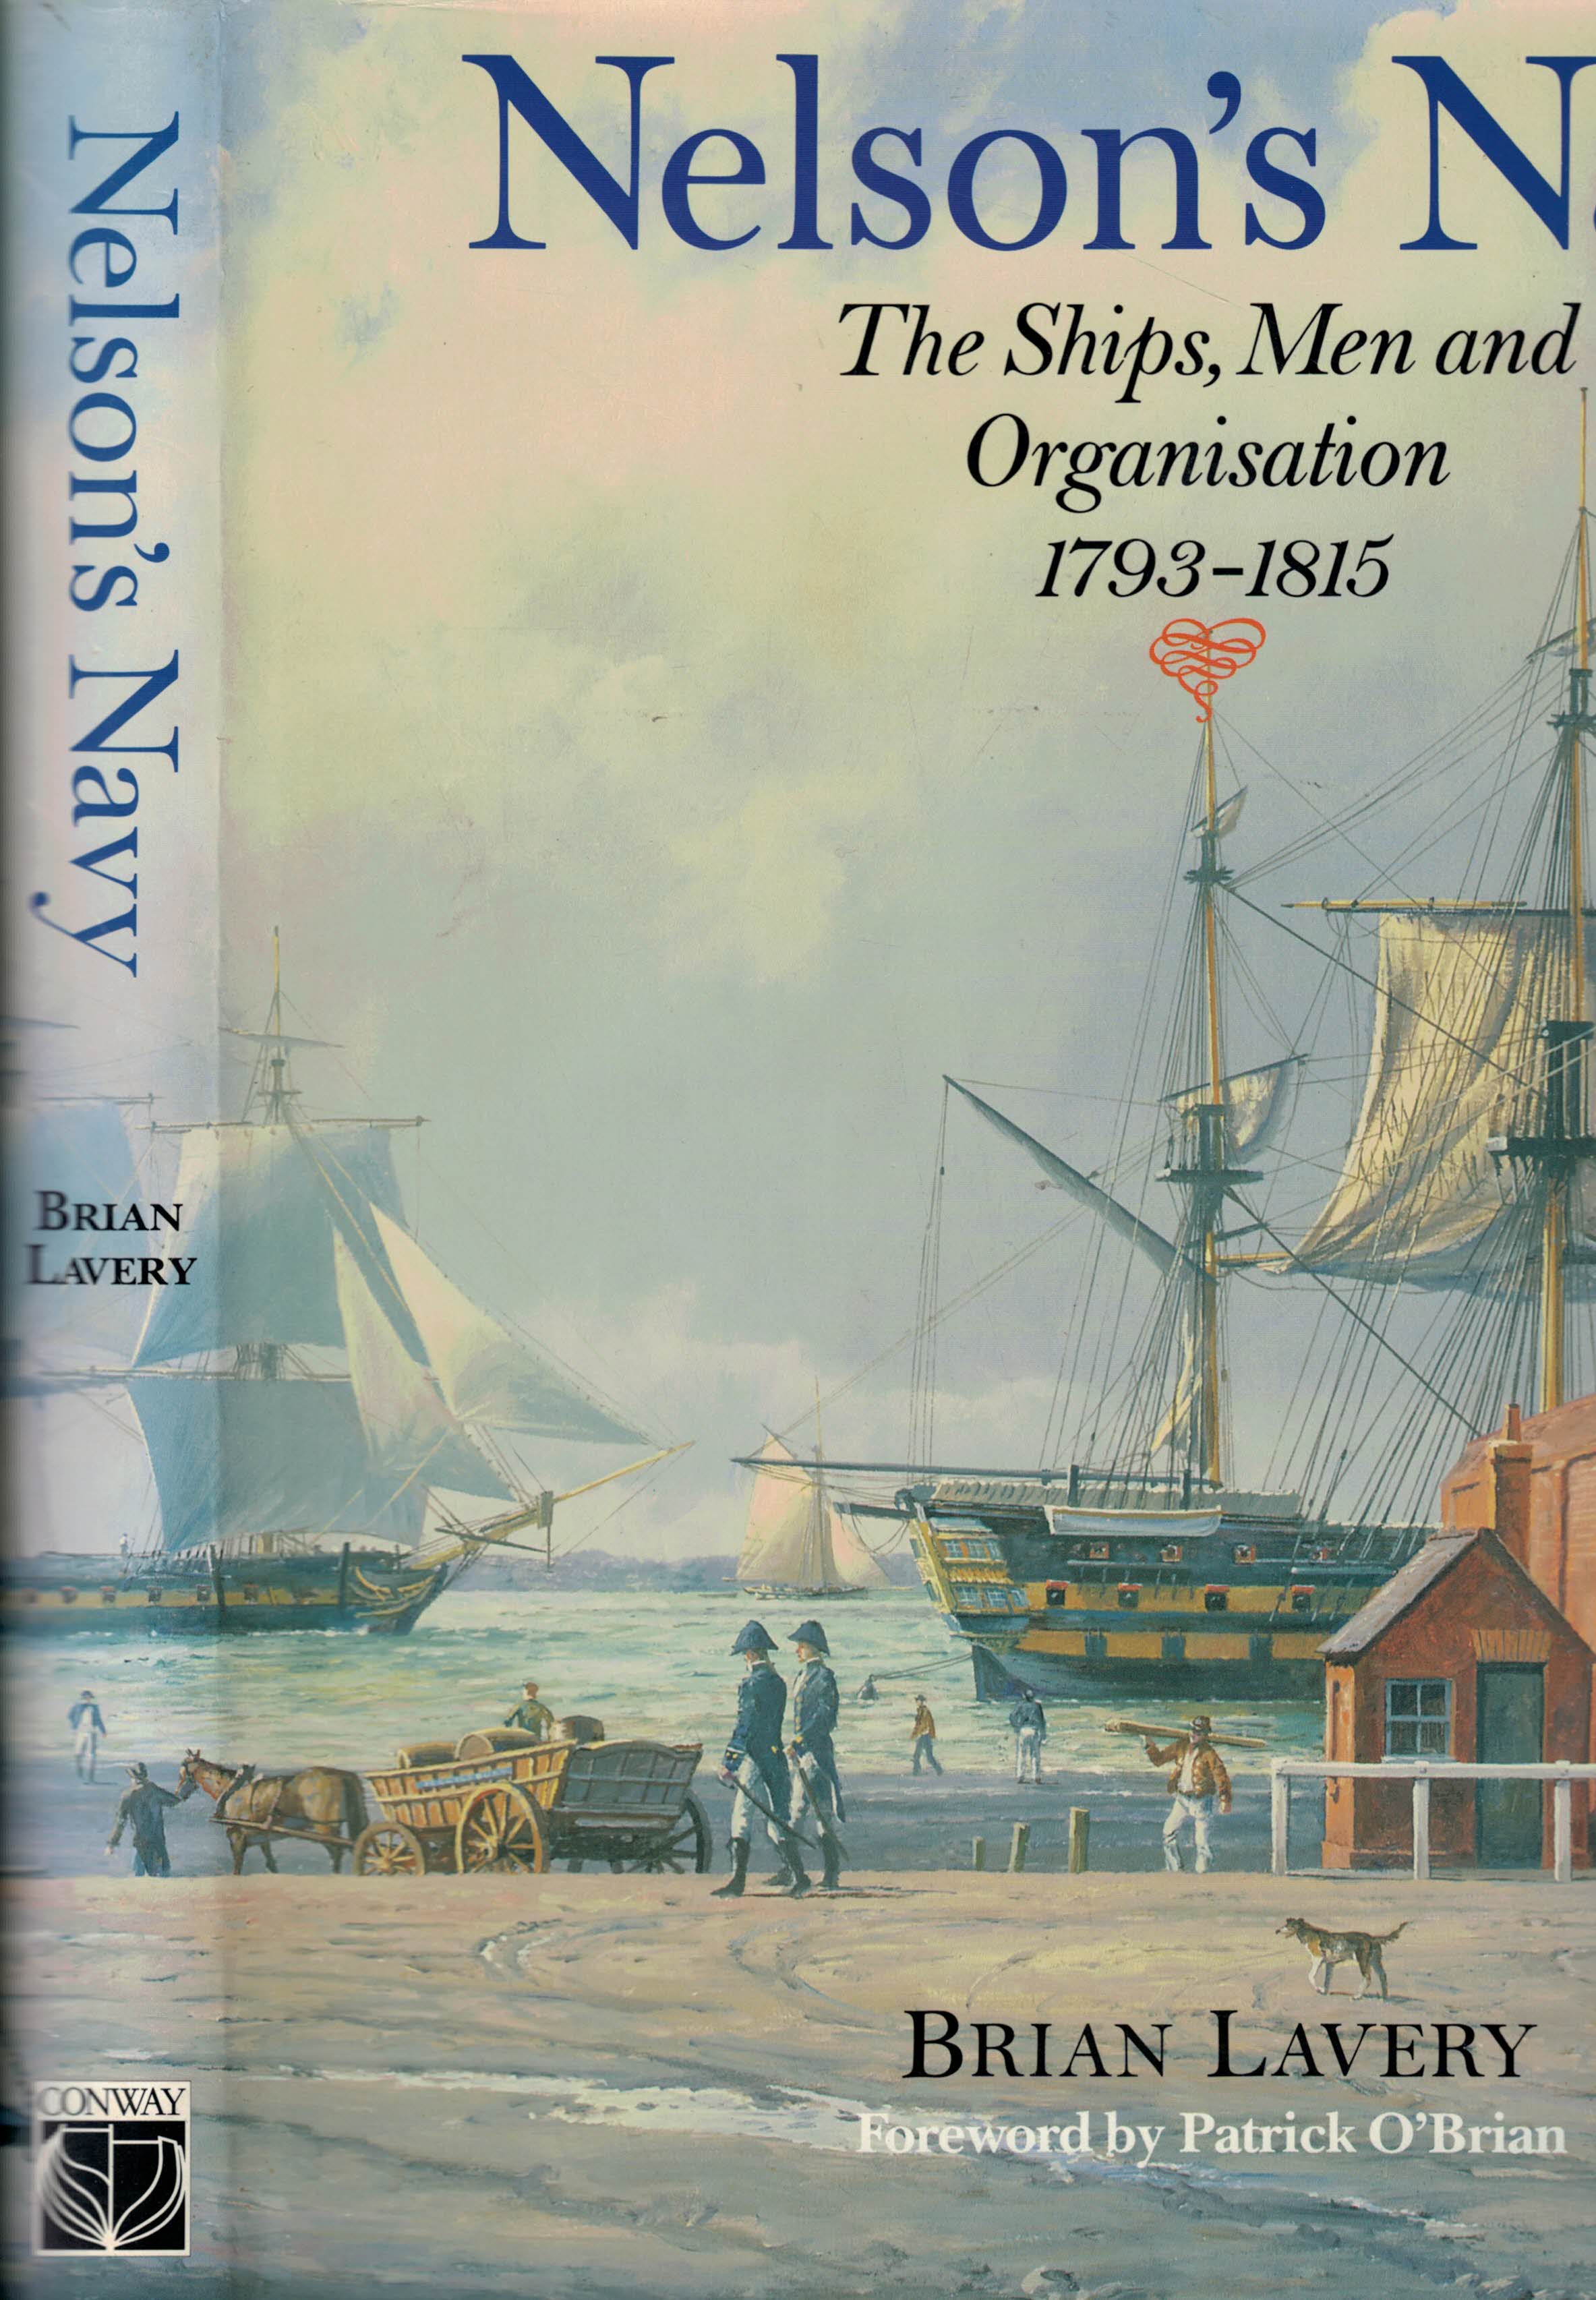 Nelson's Navy. The Ships, Men and Organisation 1793 - 1815.